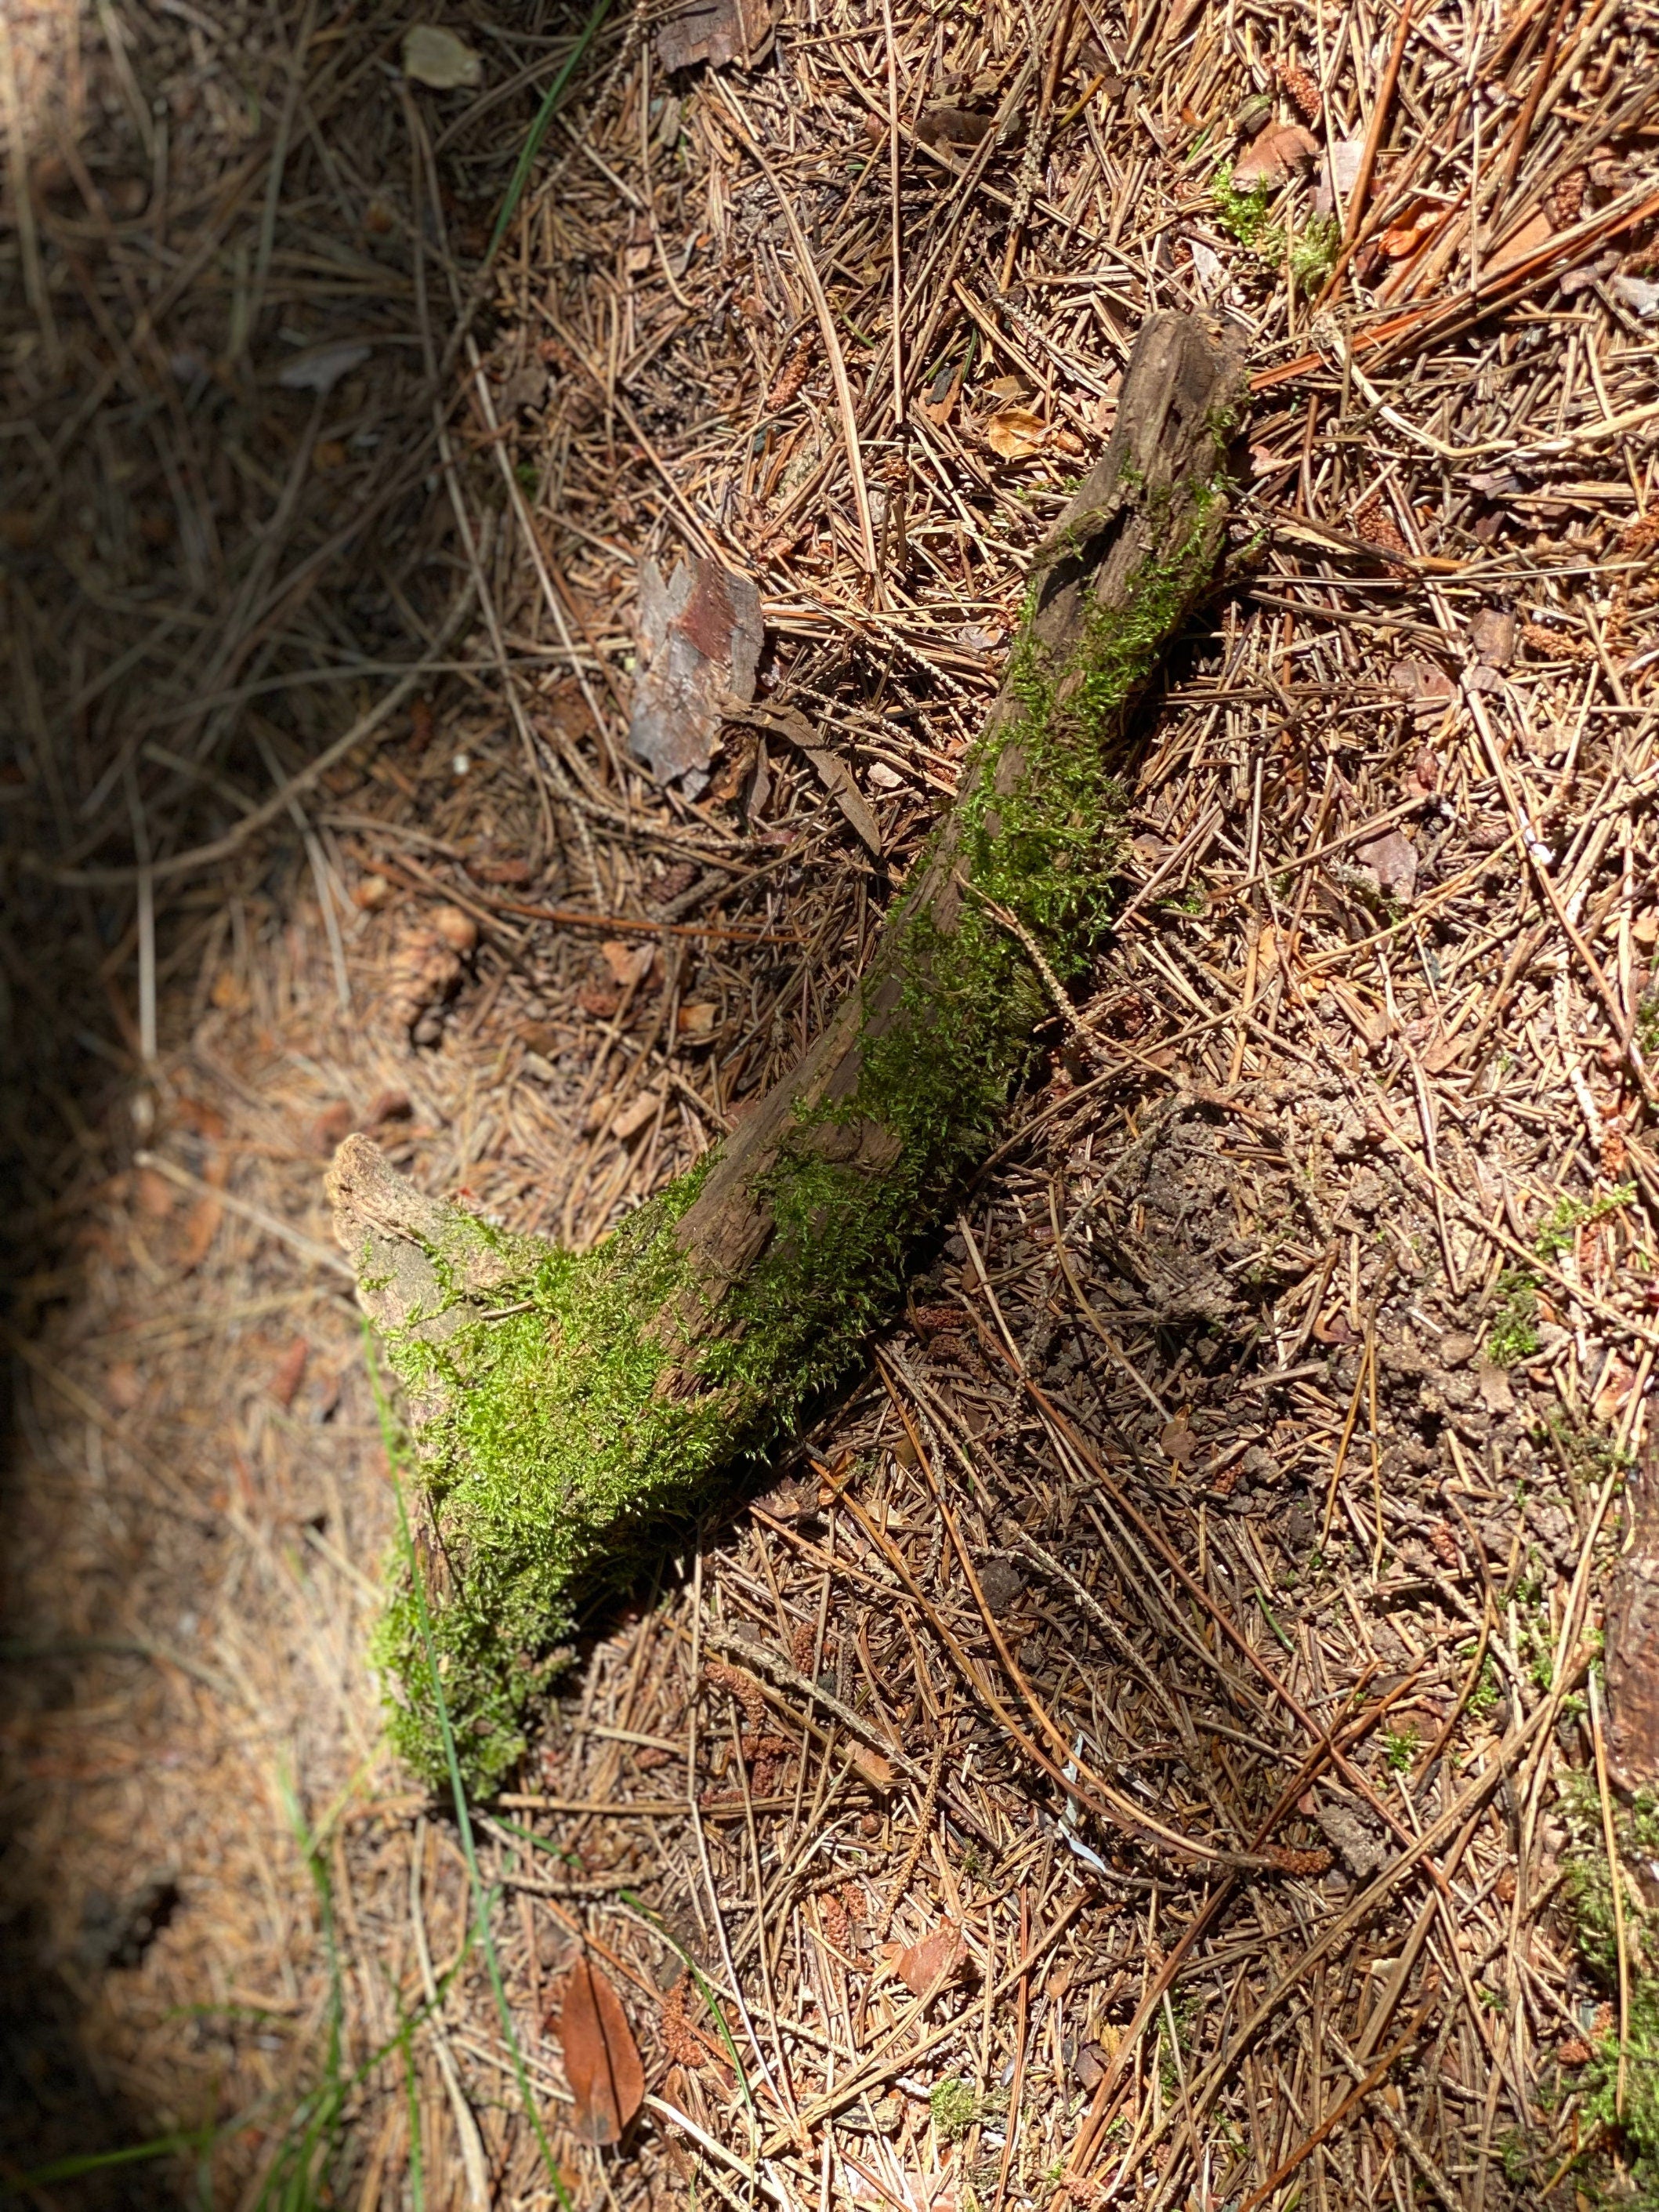 Moss Covered Log, Mossy Log, 13 Inches Long by 4 Inches Wide and 2 Inches High